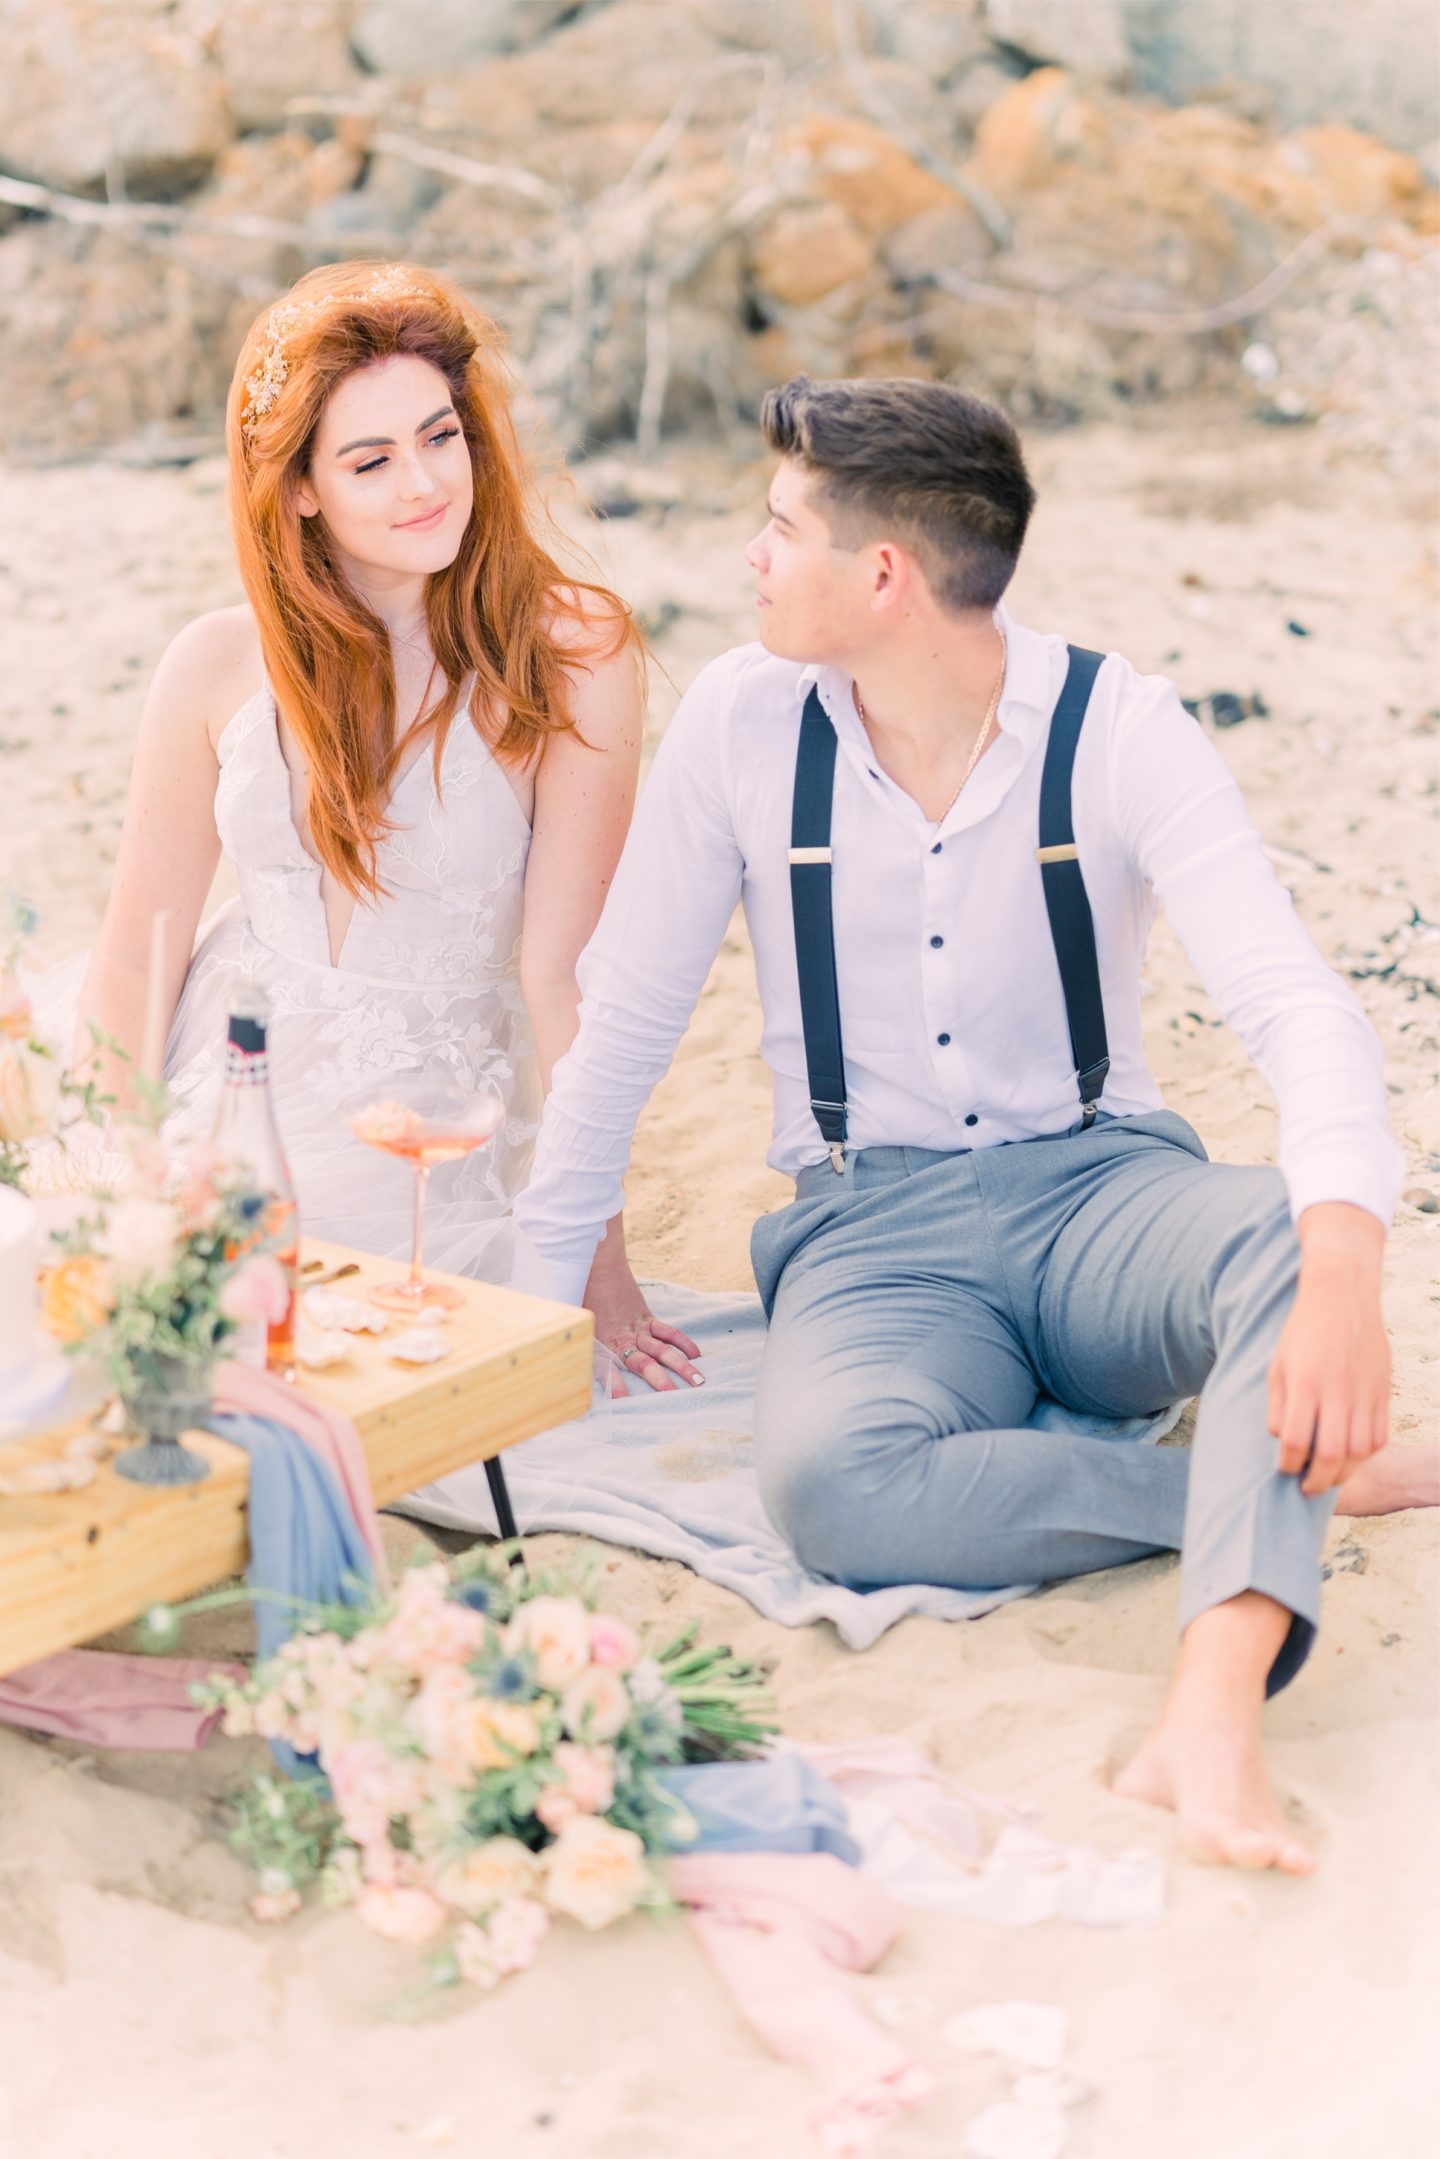 Beach Elopement Wedding With Dreamy Pastel Styling At East Mersea Island